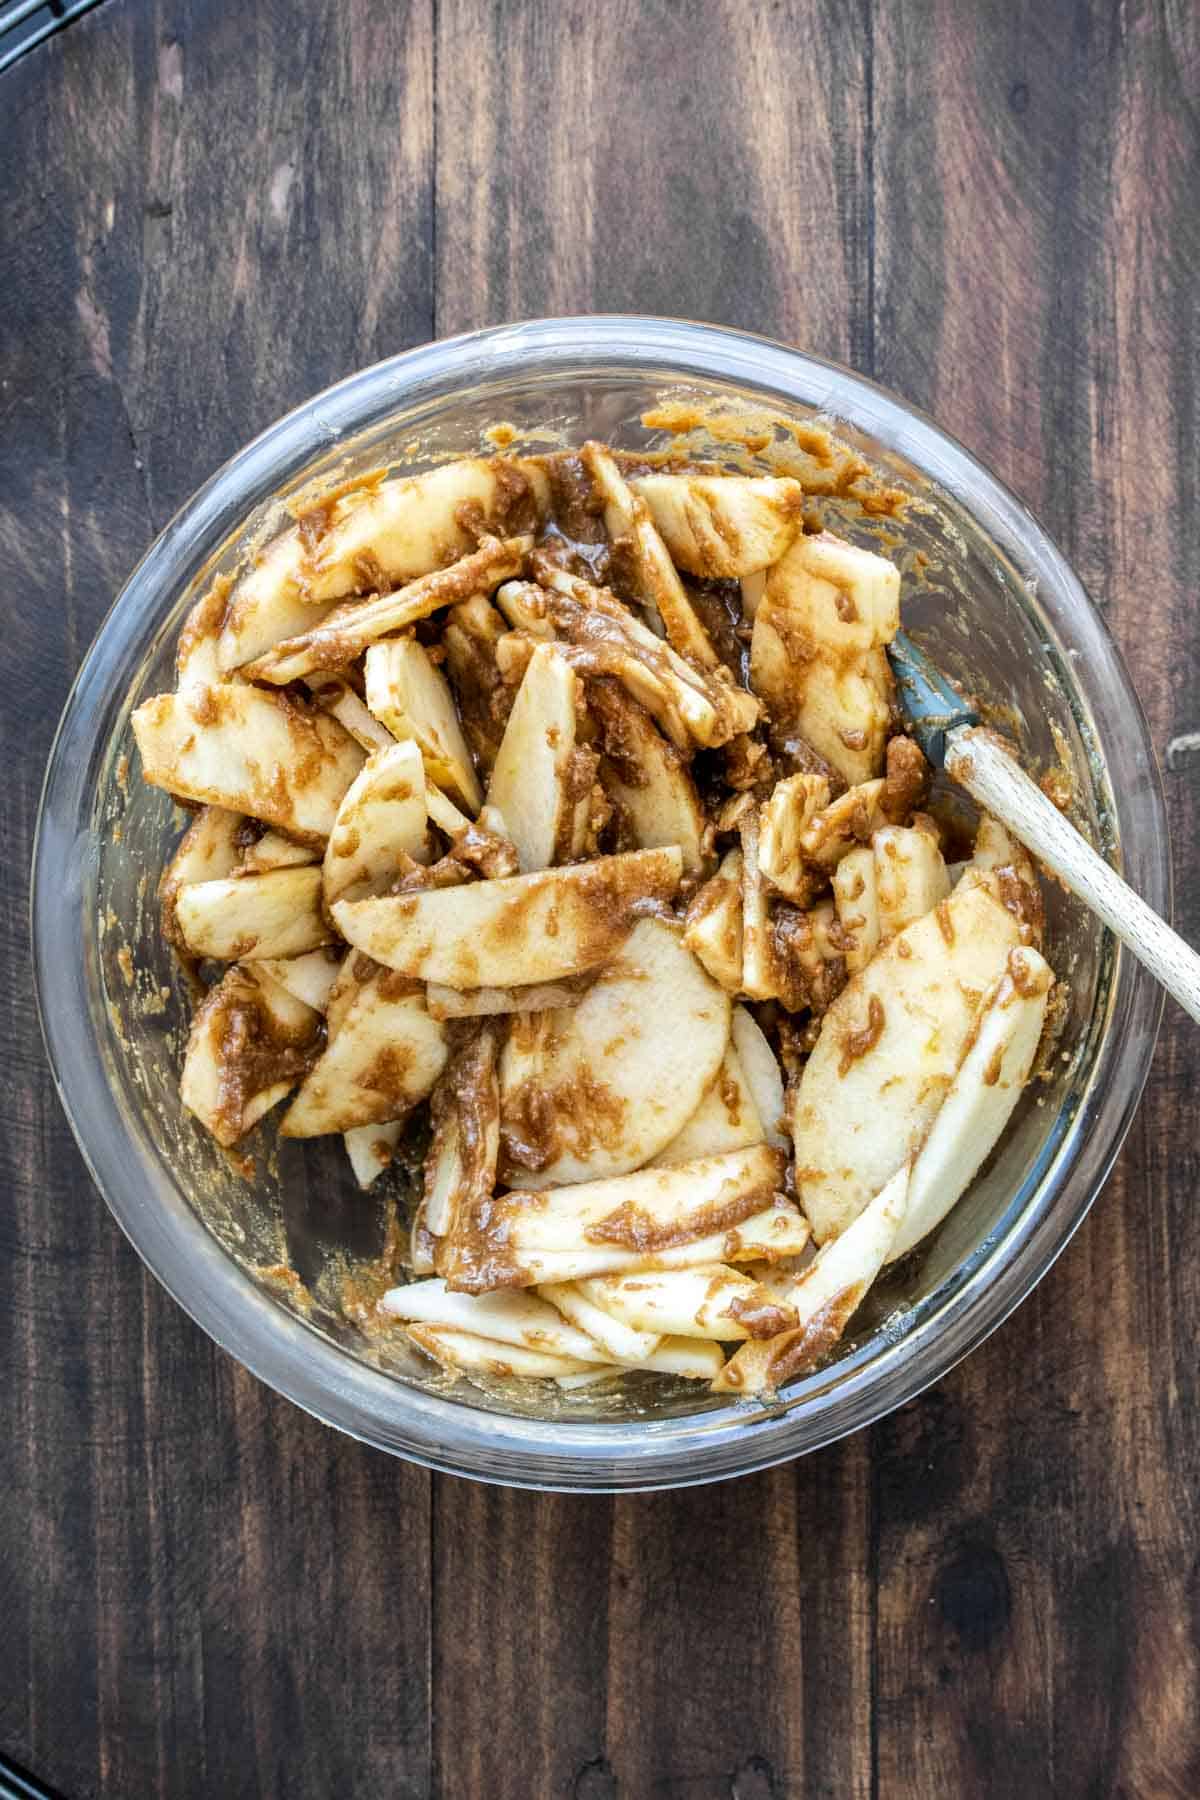 Sliced apples covered in brown topping in a glass bowl